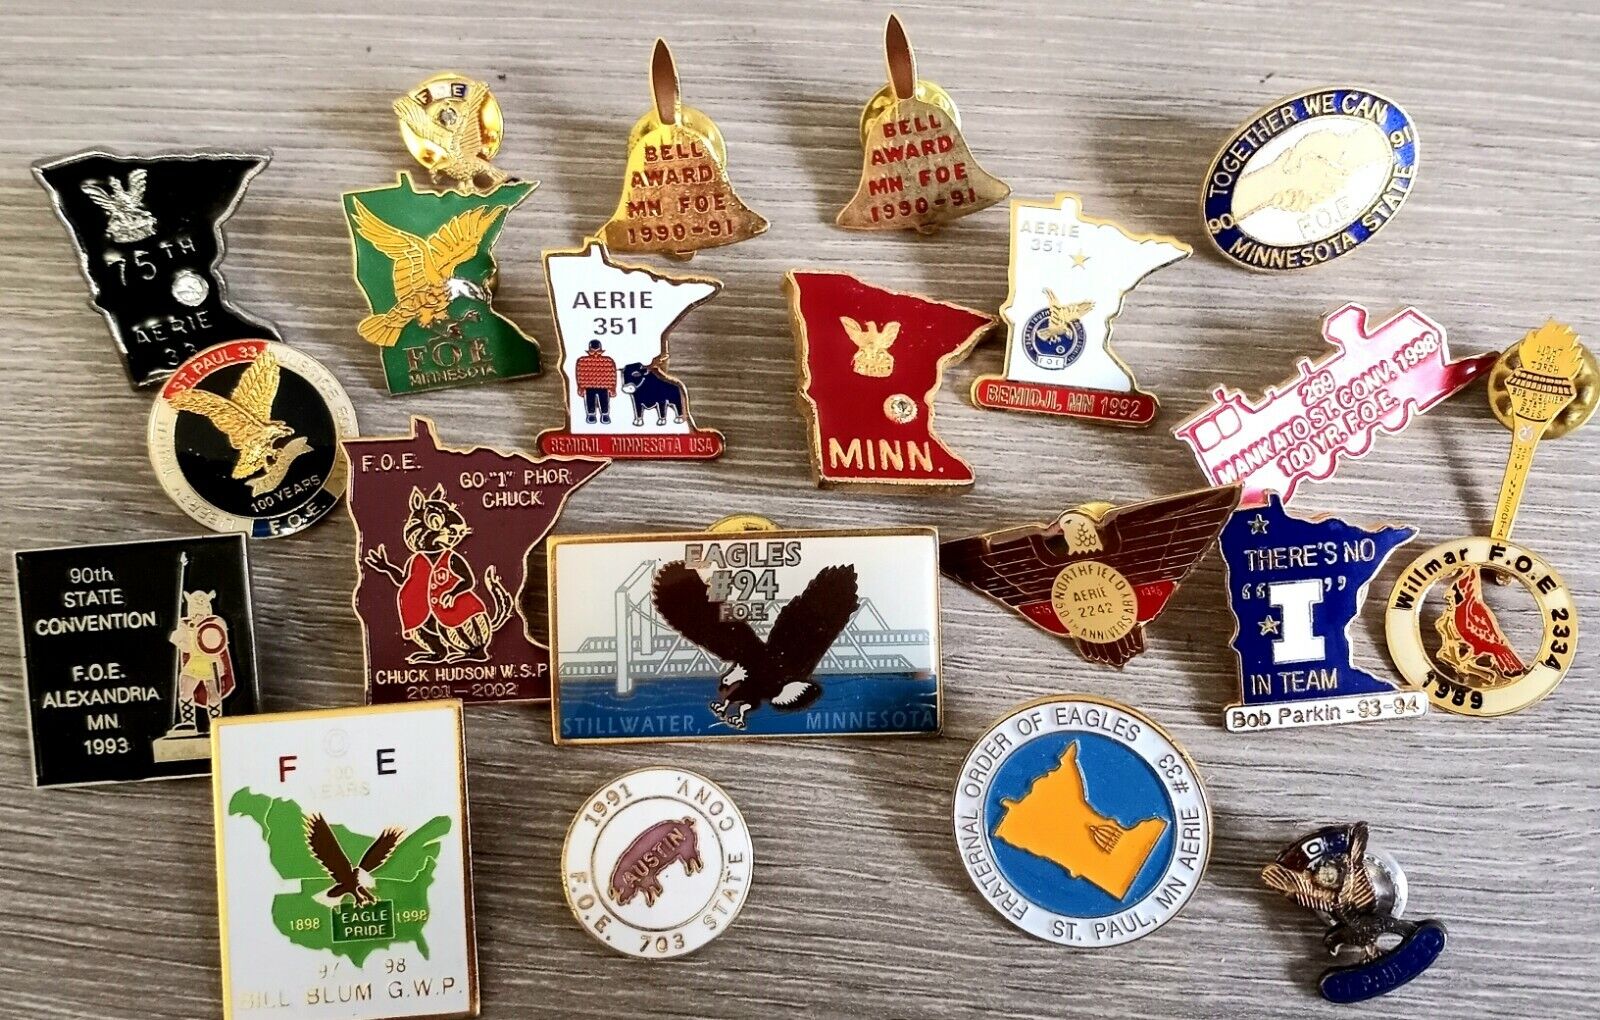 Vintage Minnesota Themed Foe Fraternal Order Of Eagles Aerie Pins Lot Collection